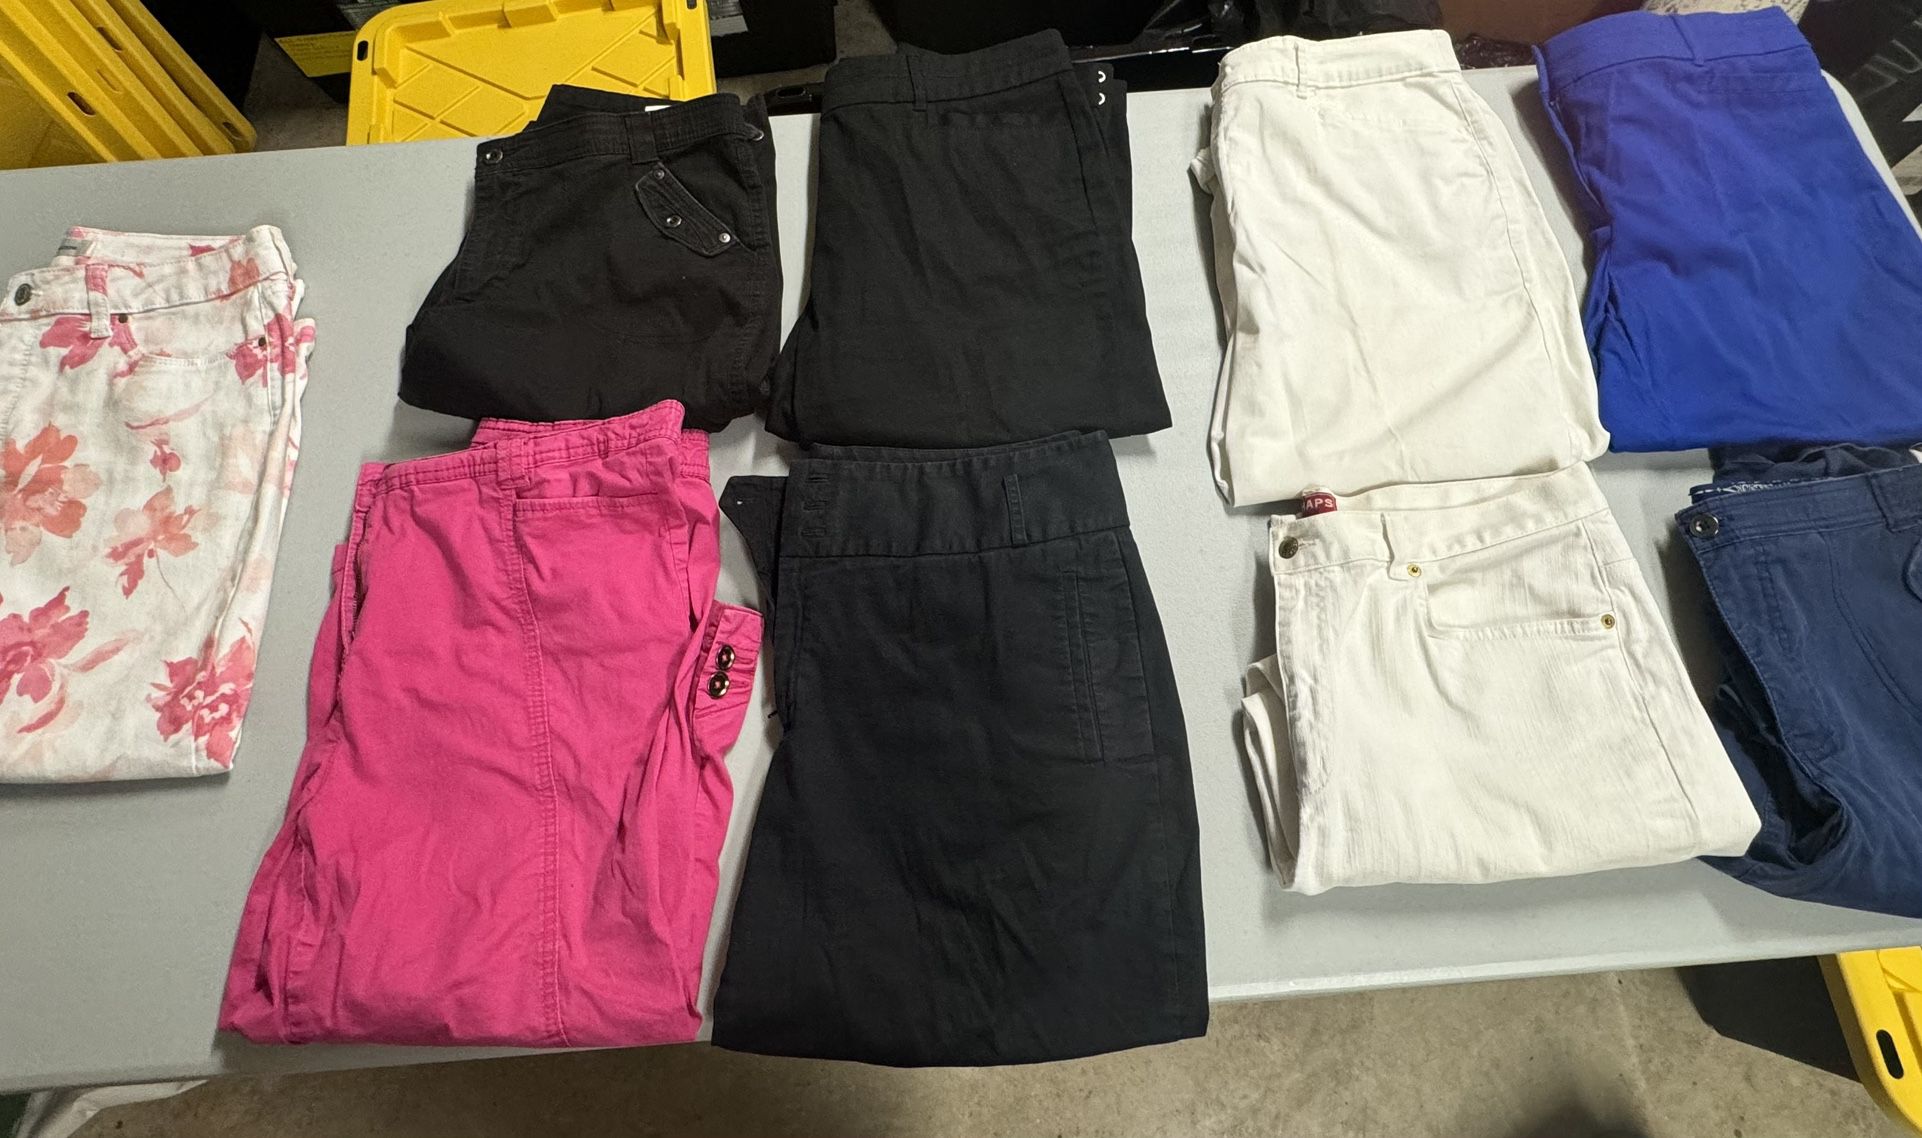 Capris-Size 14-Colors:White w/Pink Flowers; Fuchsia; White(2); Blk(3); Blue (2); $5 ea or 4 for $15